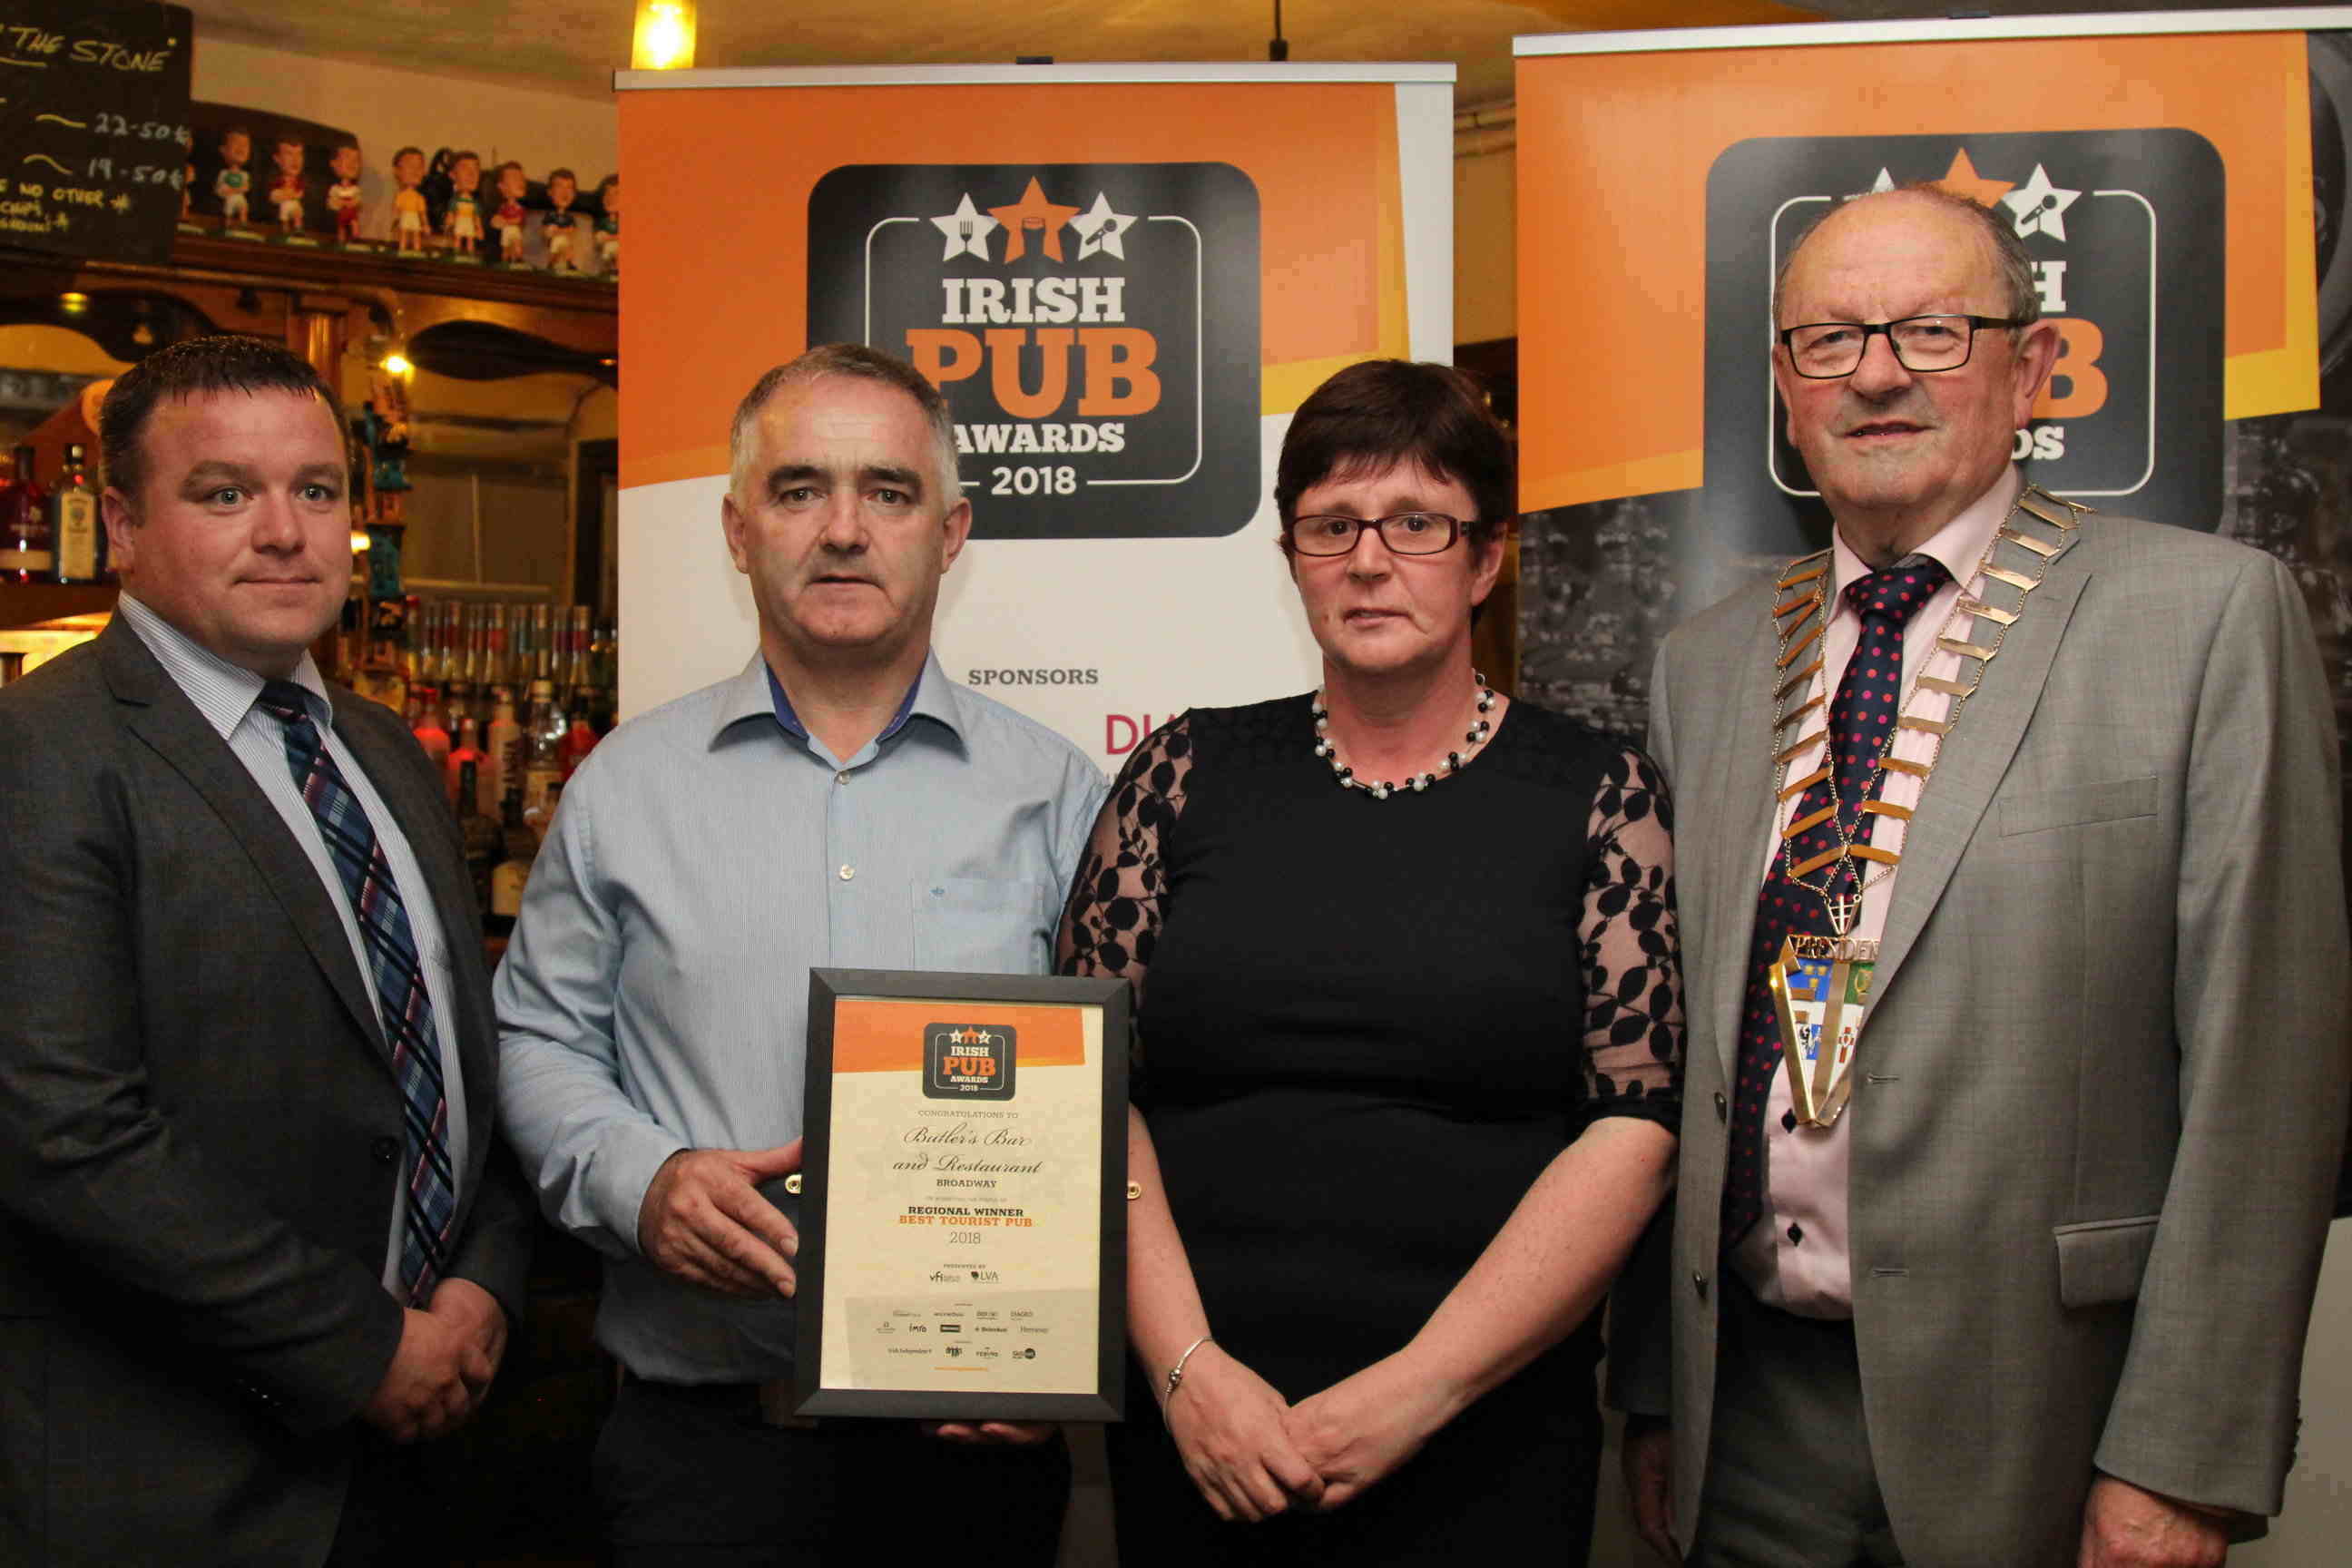 From left: Molson Coors’ Jack Wallace with Best Tourist Pub winners Pat and Catherine Cullen of Butler’s Bar & Restaurant, Broadway Co Wexford and VFI President Padraic McGann.